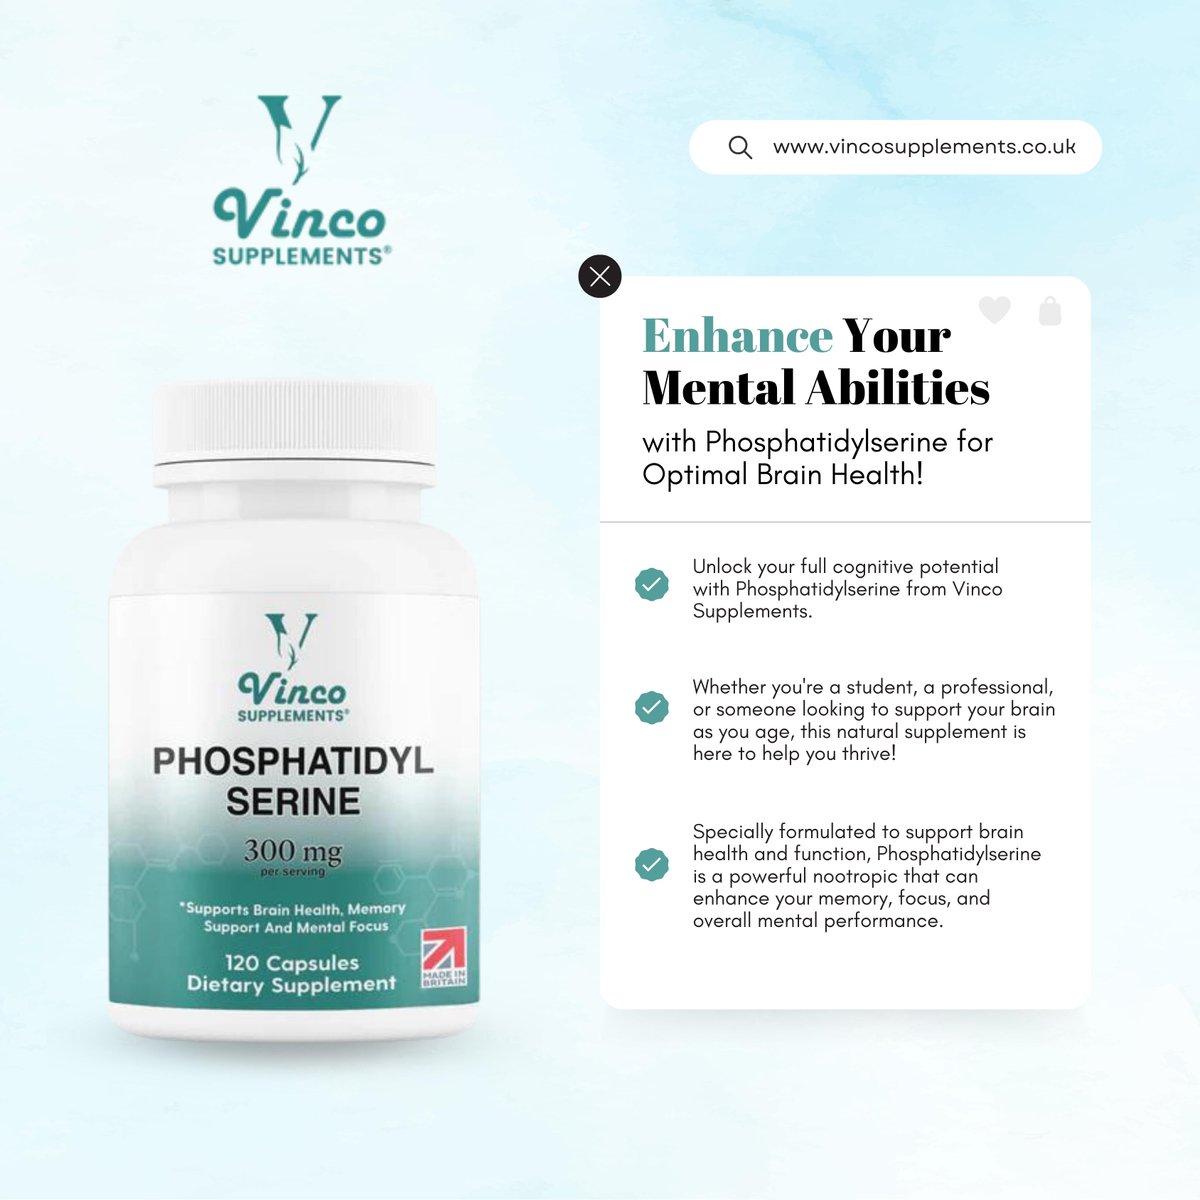 Unlock your full cognitive potential with Phosphatidylserine from Vinco Supplements. Specially formulated to support brain health and function.
------
Shop Now: vincosupplements.co.uk/products/phosp…
.
#vincosupplements #phosphatidylserine #cognitiveperformance